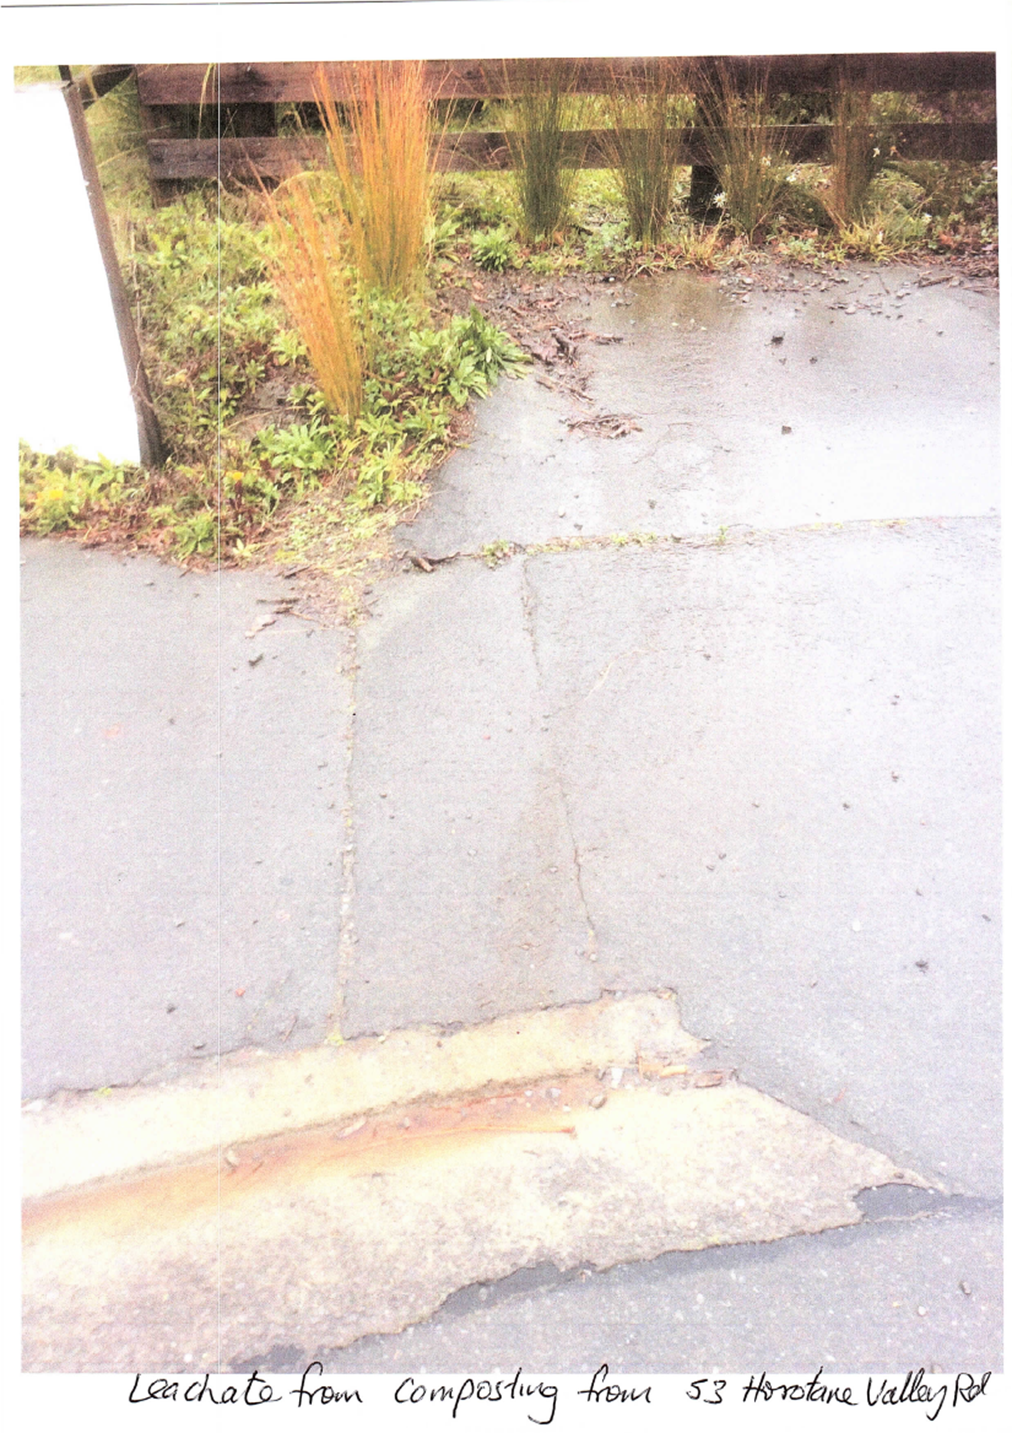 A road with a crack in the ground

Description automatically generated